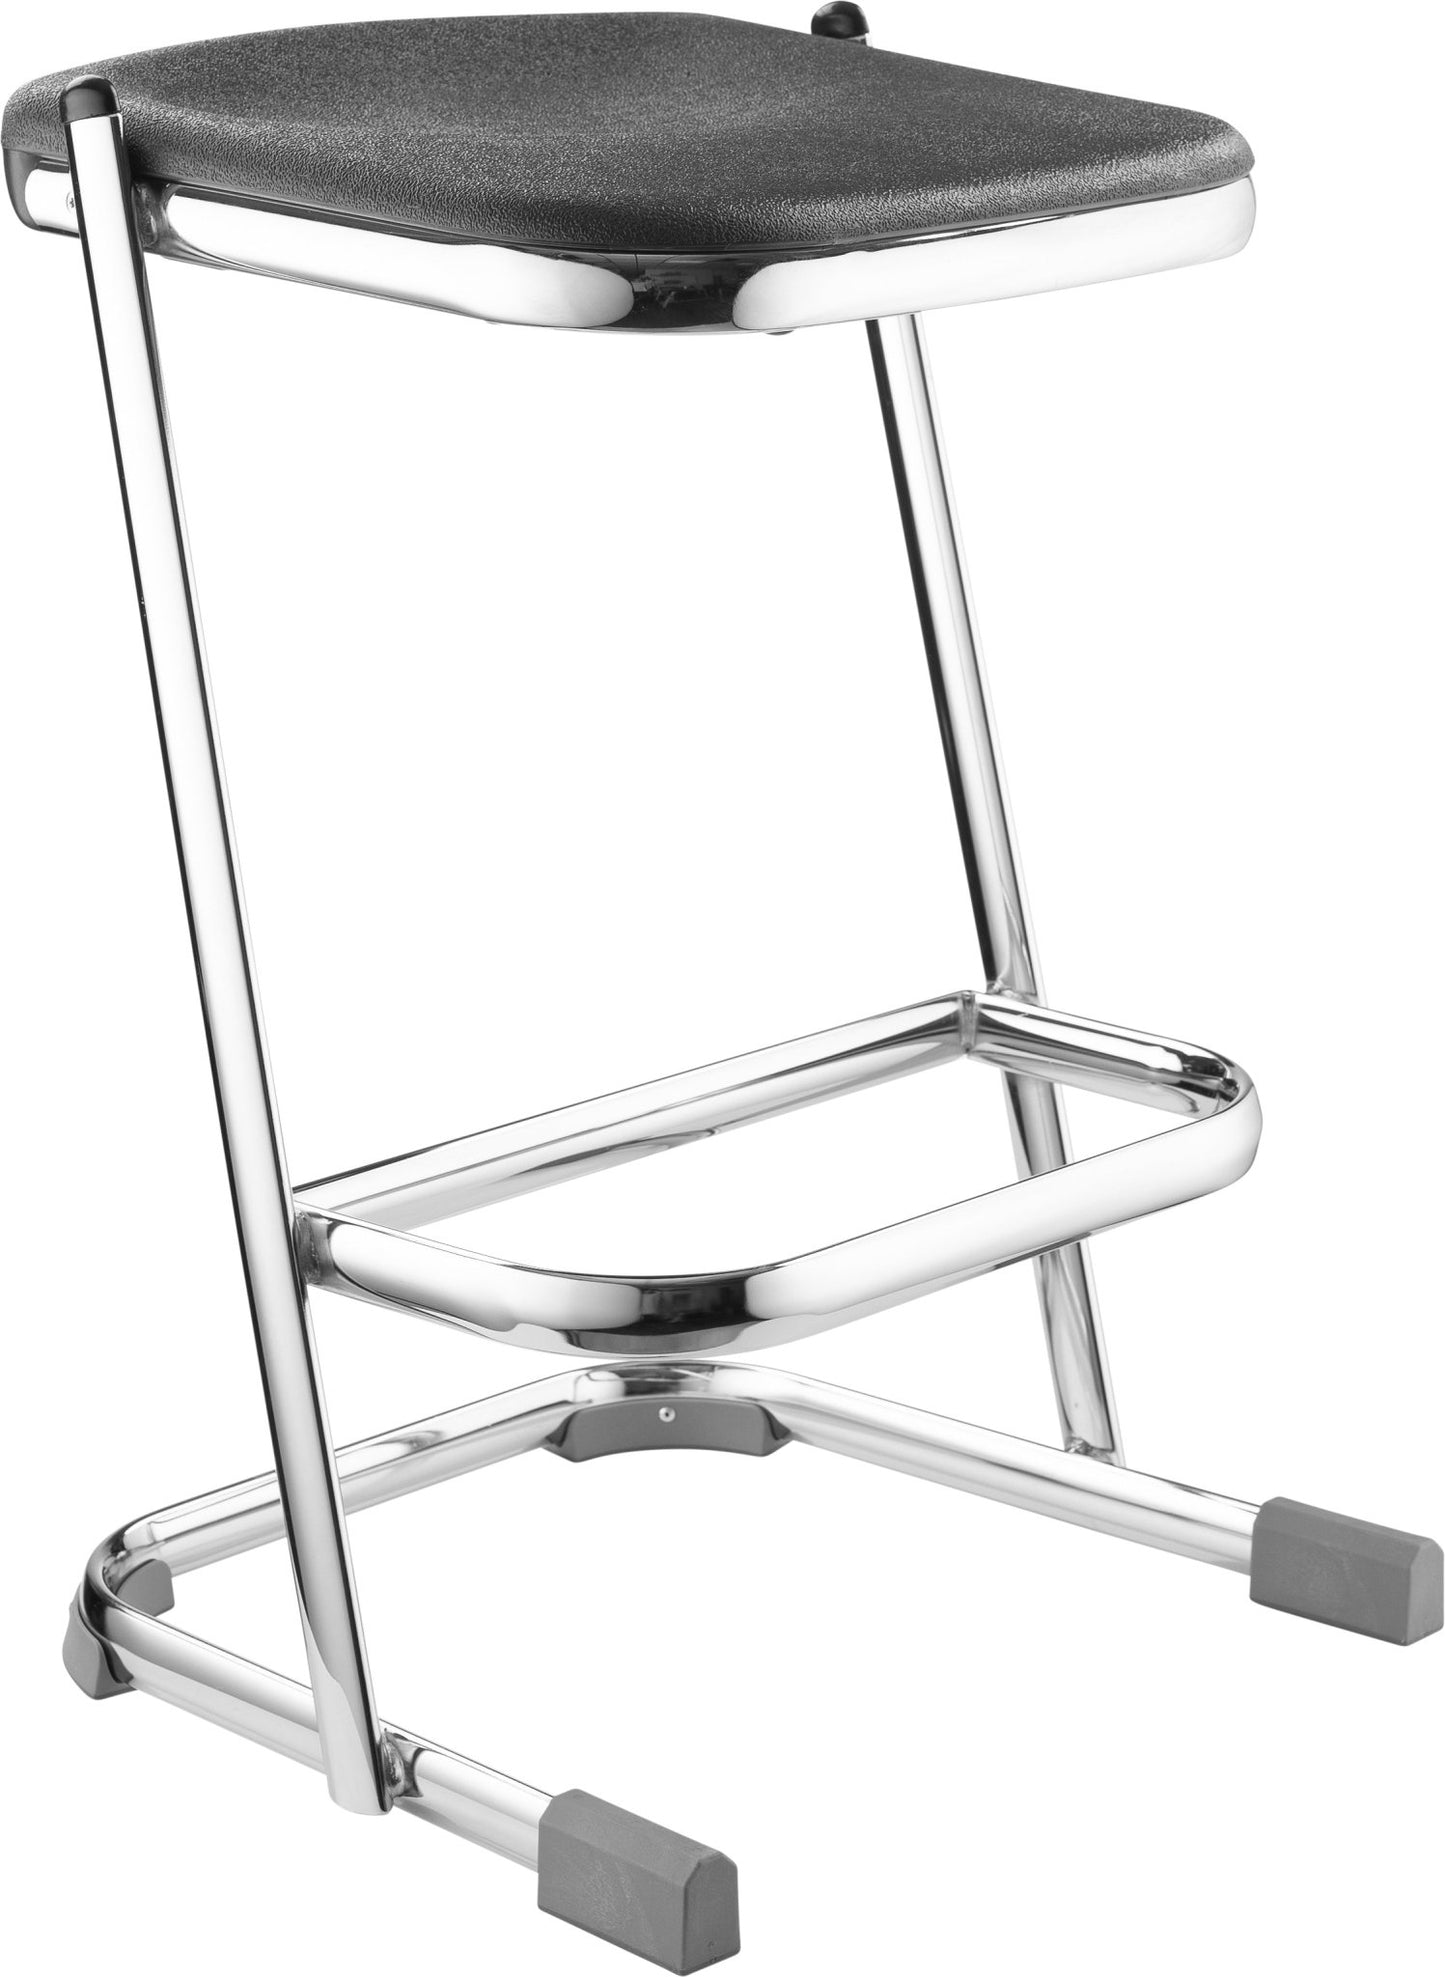 NPS Elephant Z-stool 24" H Stool with Blow Molded Seat (National Public Seating NPS-6624) - SchoolOutlet